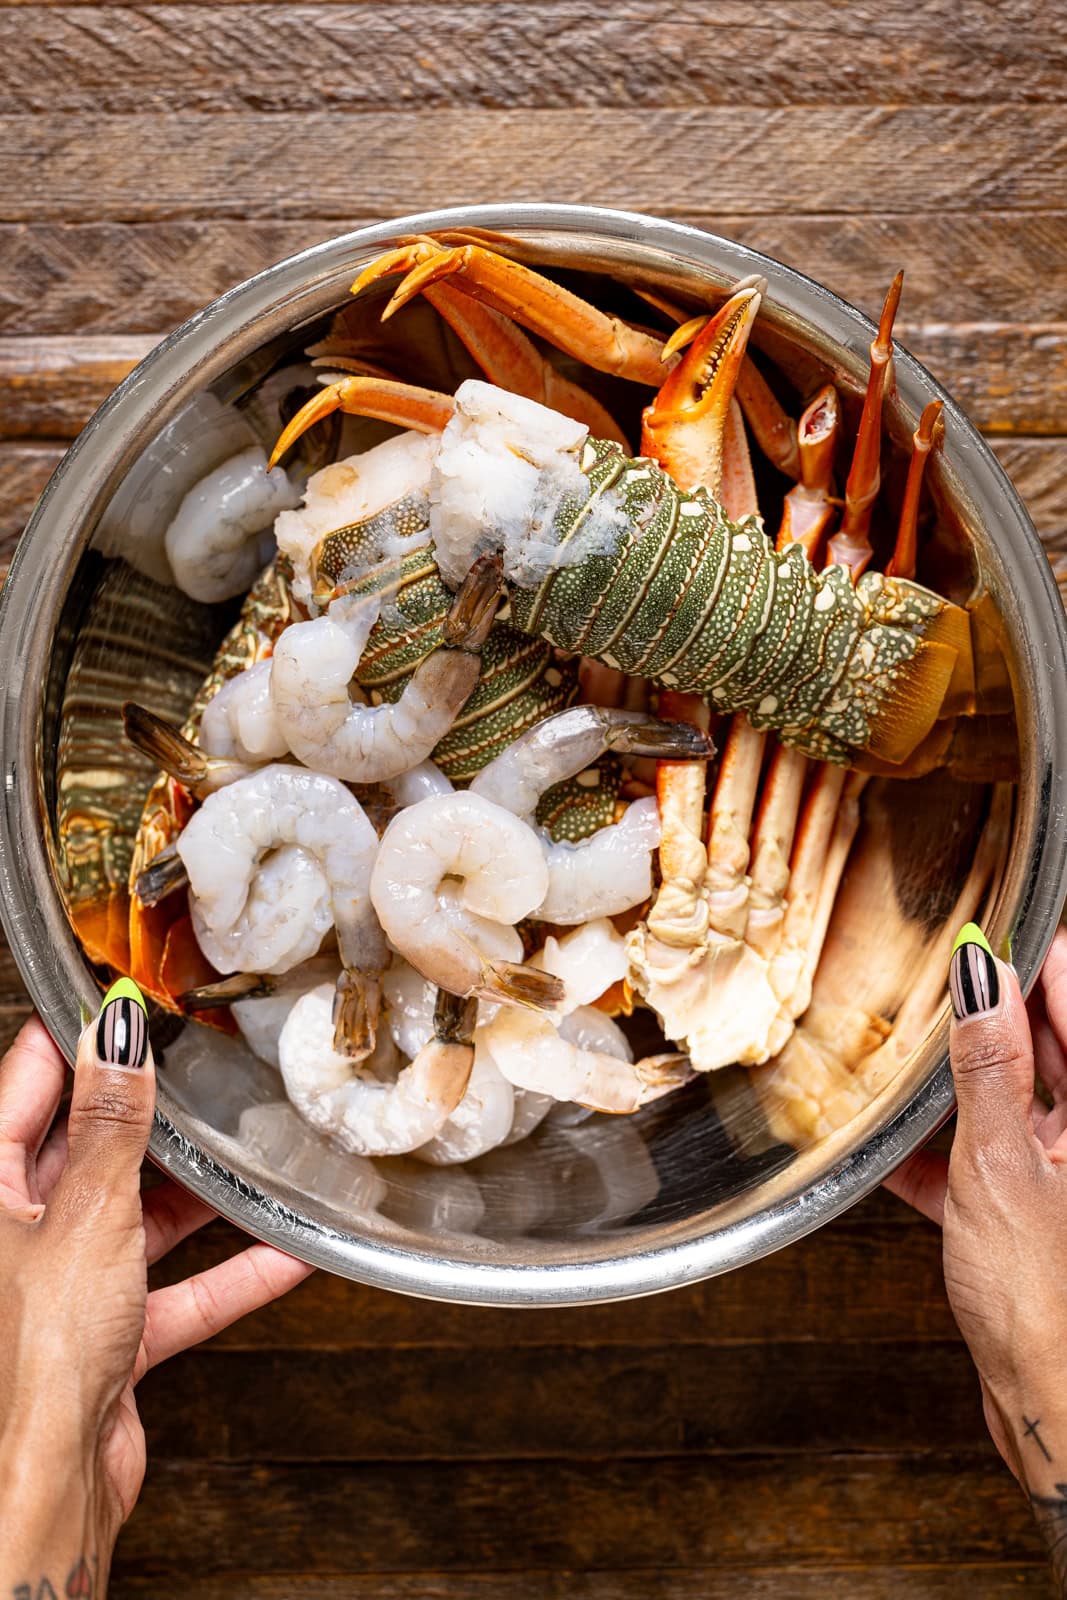 Seafoods in a silver metal bowl being held.